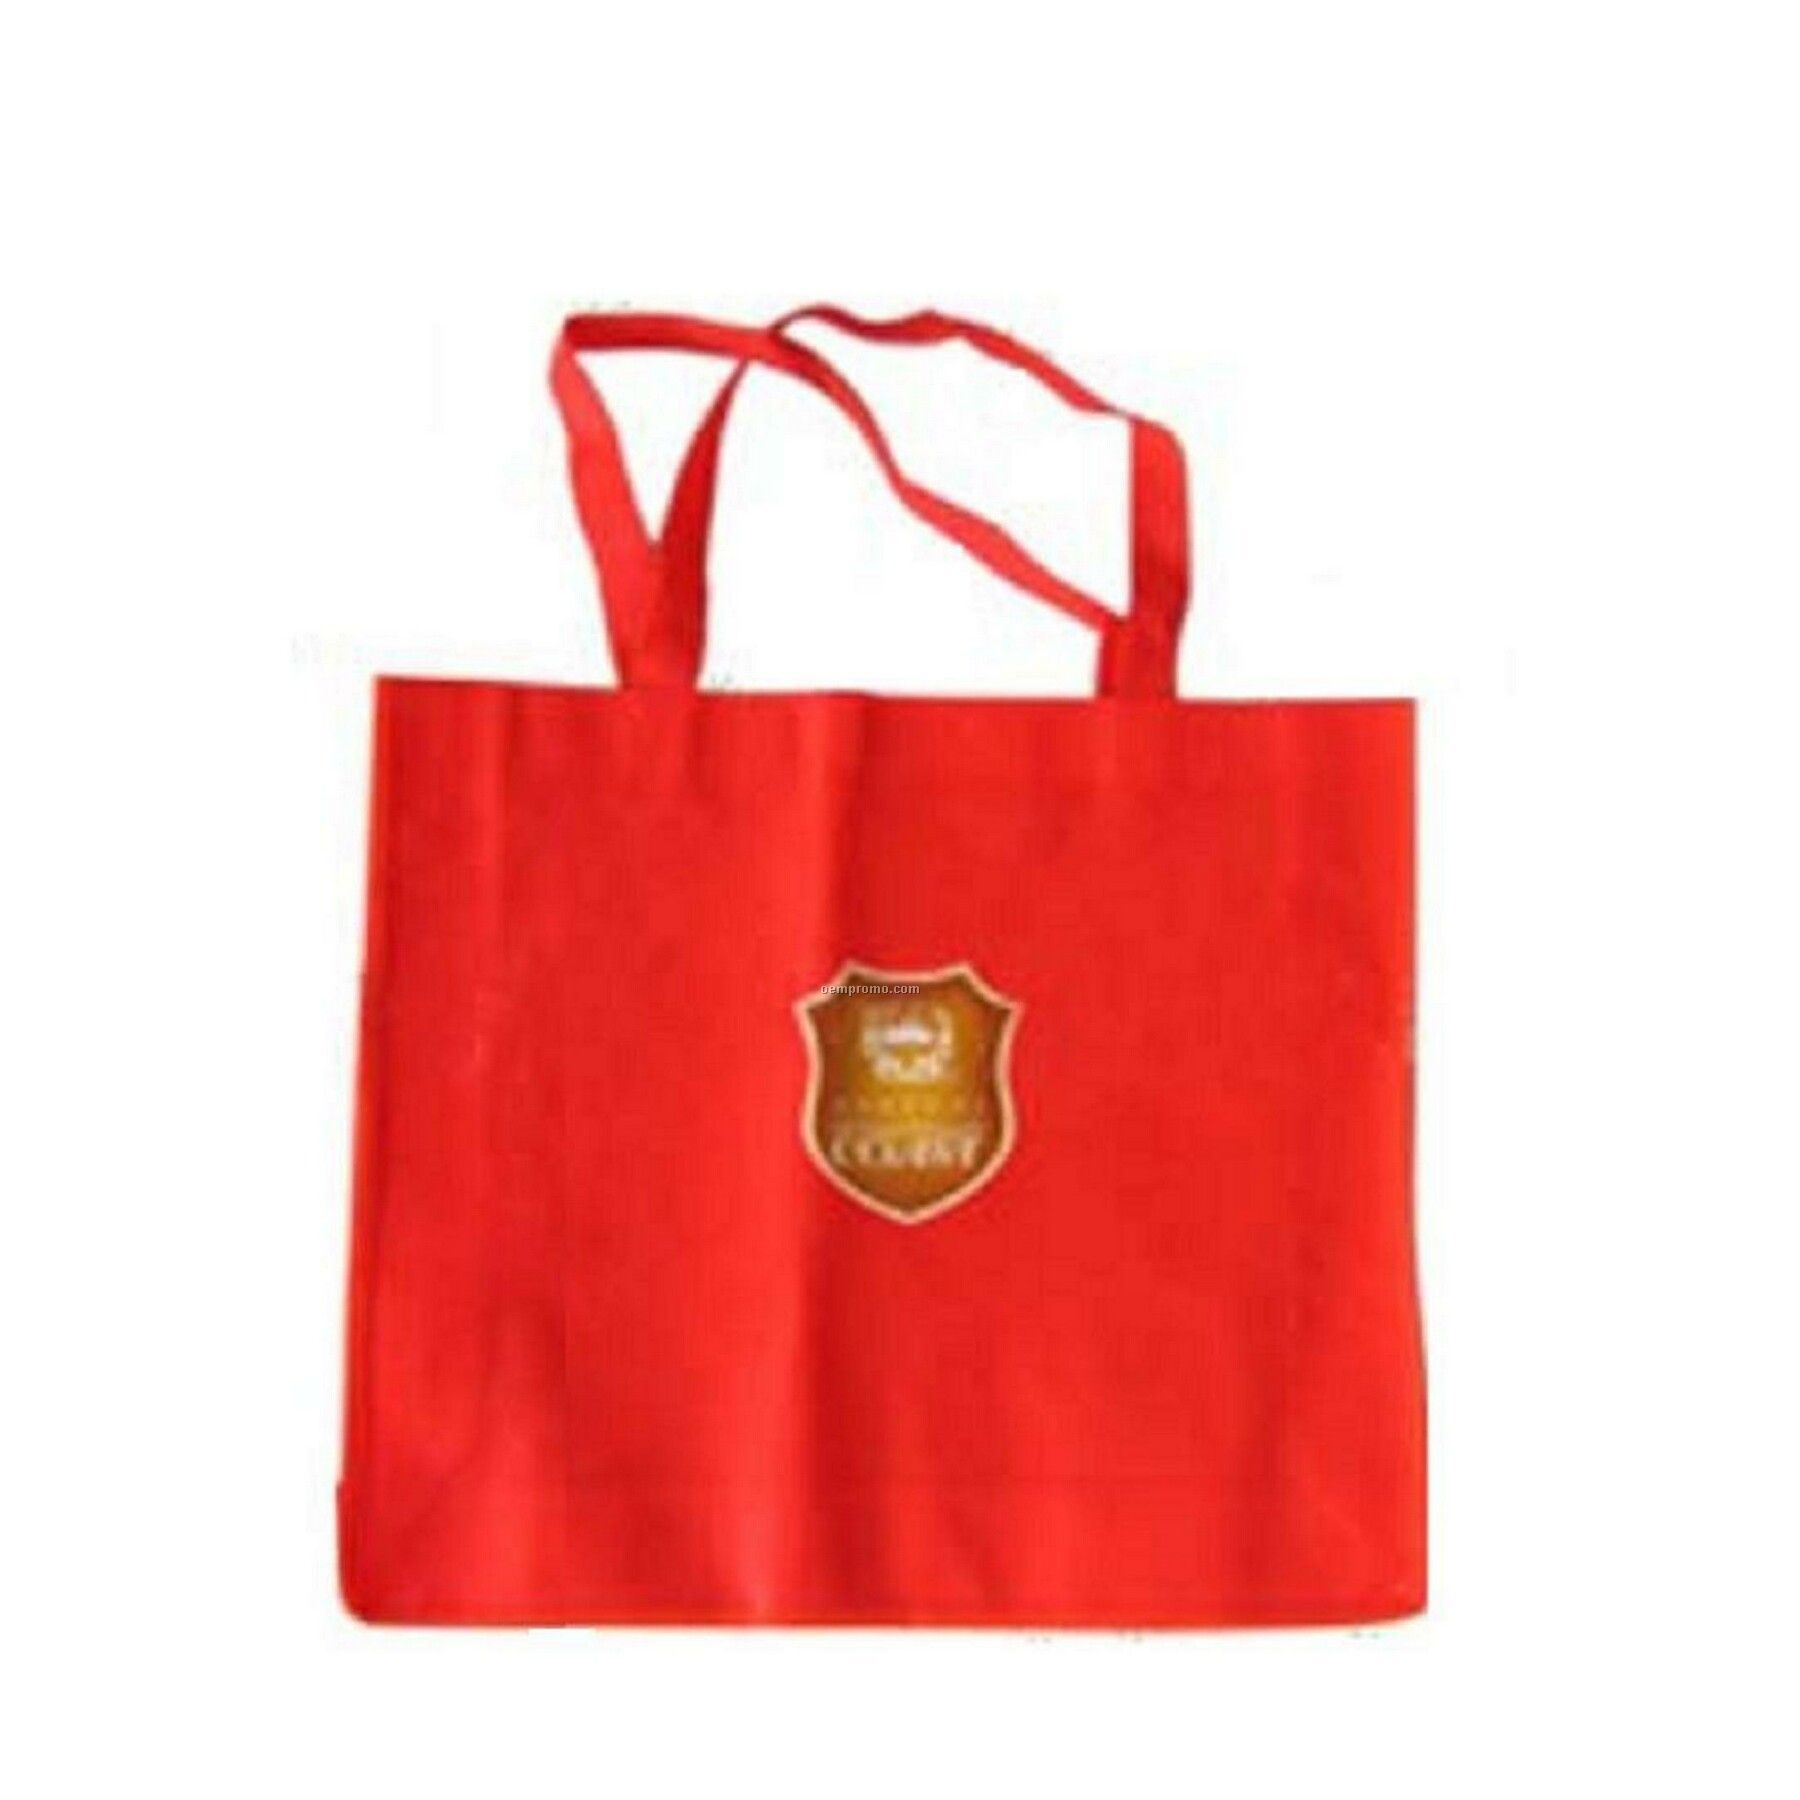 High Quality Non Woven Tote Bag. 80 Gsm Fabric, Measures 15"W X 15"H X 4"D